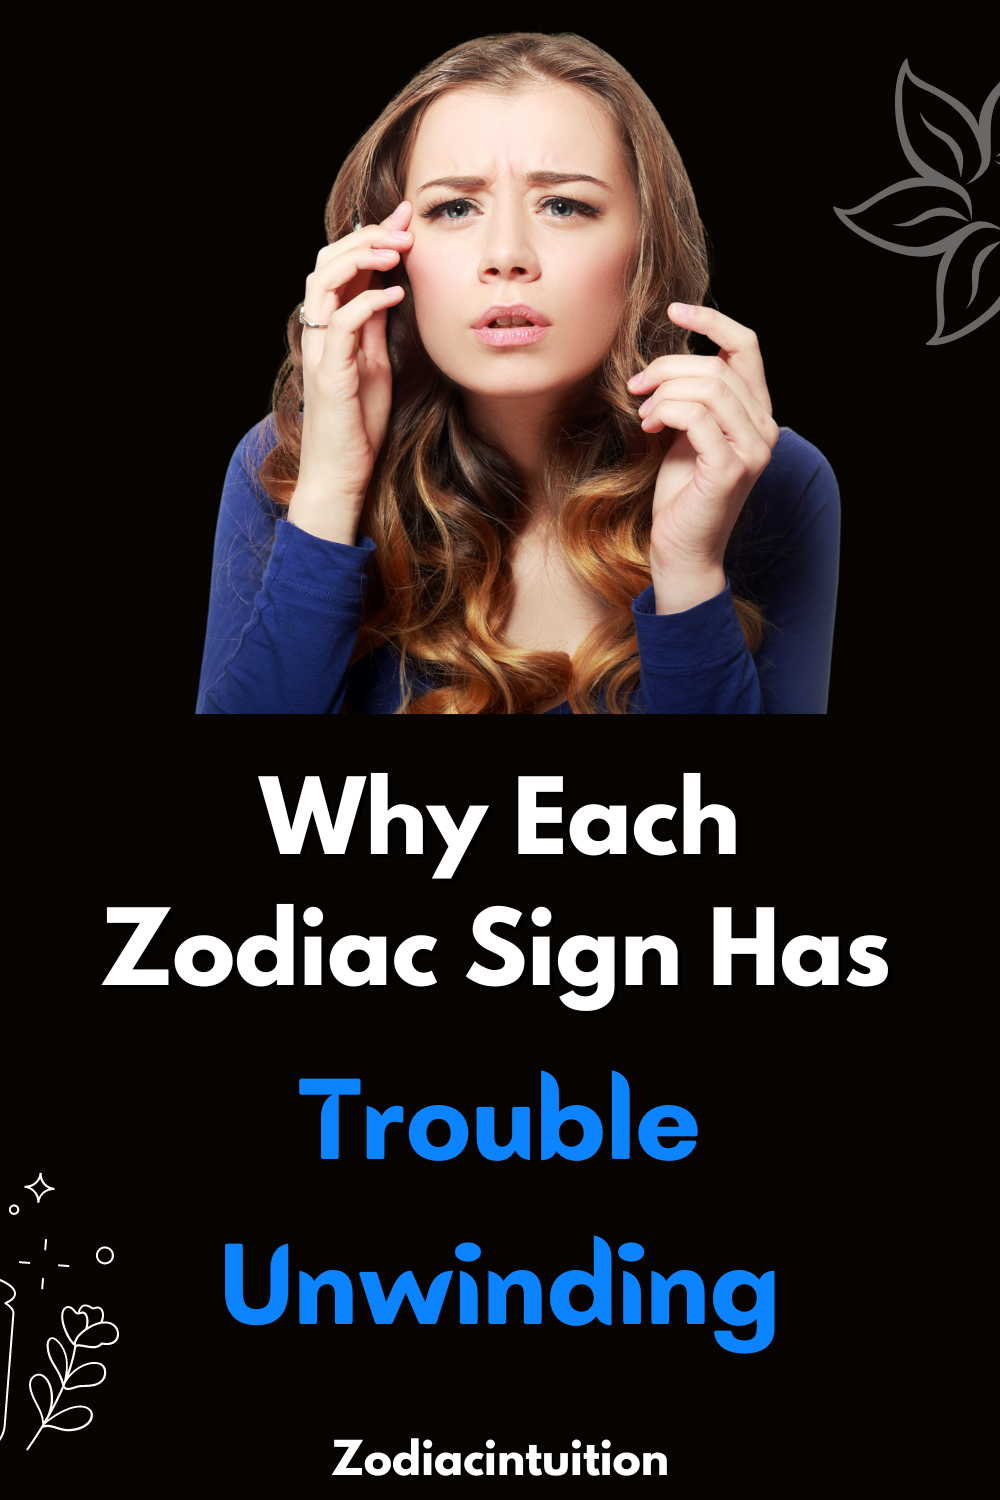 Why Each Zodiac Sign Has Trouble Unwinding